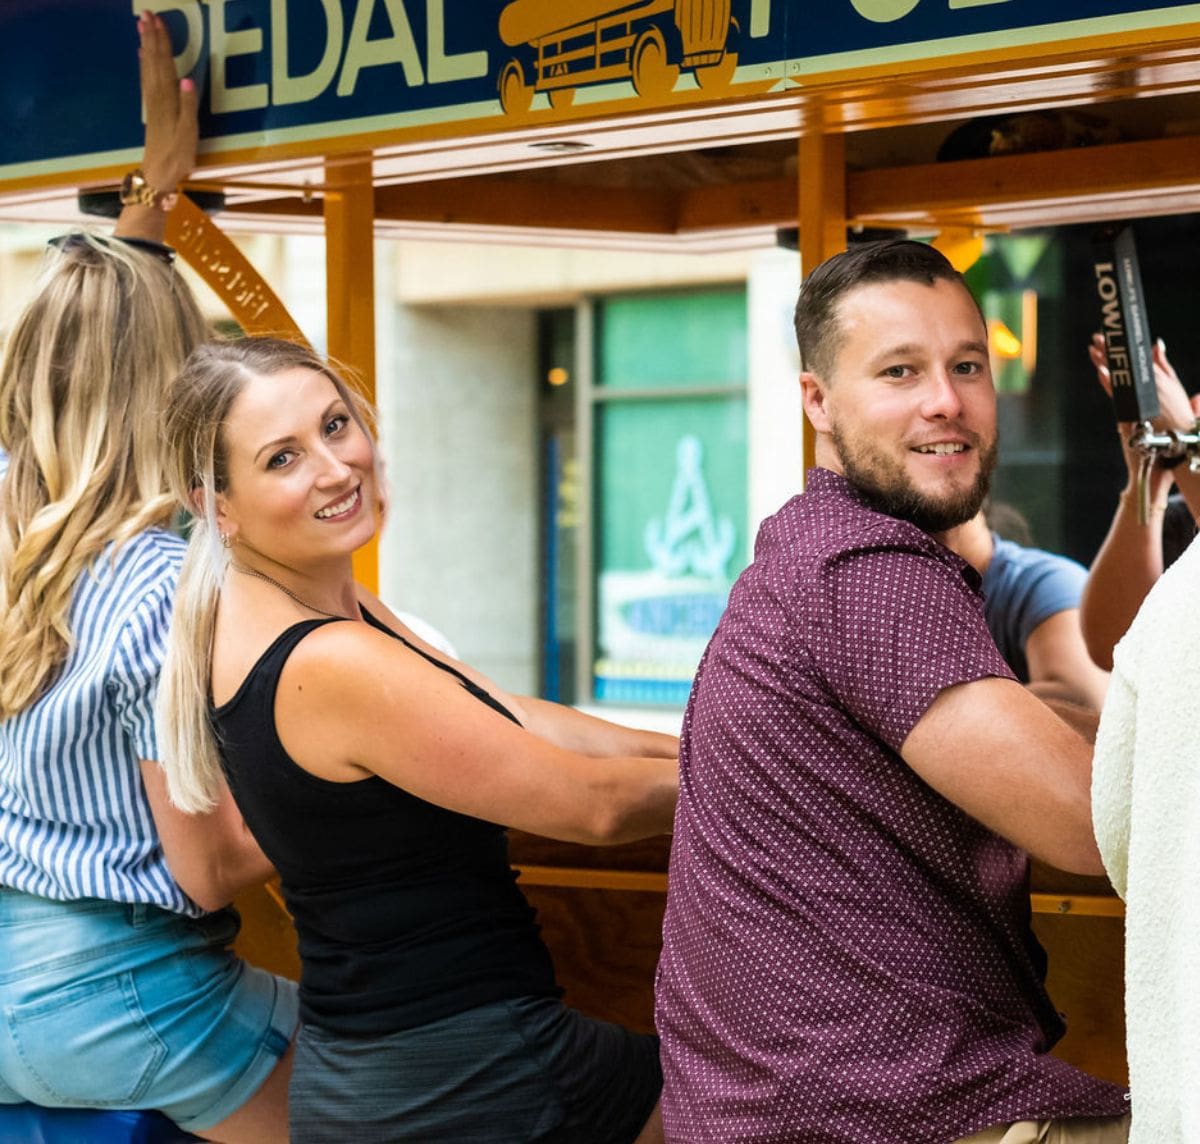 close-up of couple sitting on pedal pub bike smiling